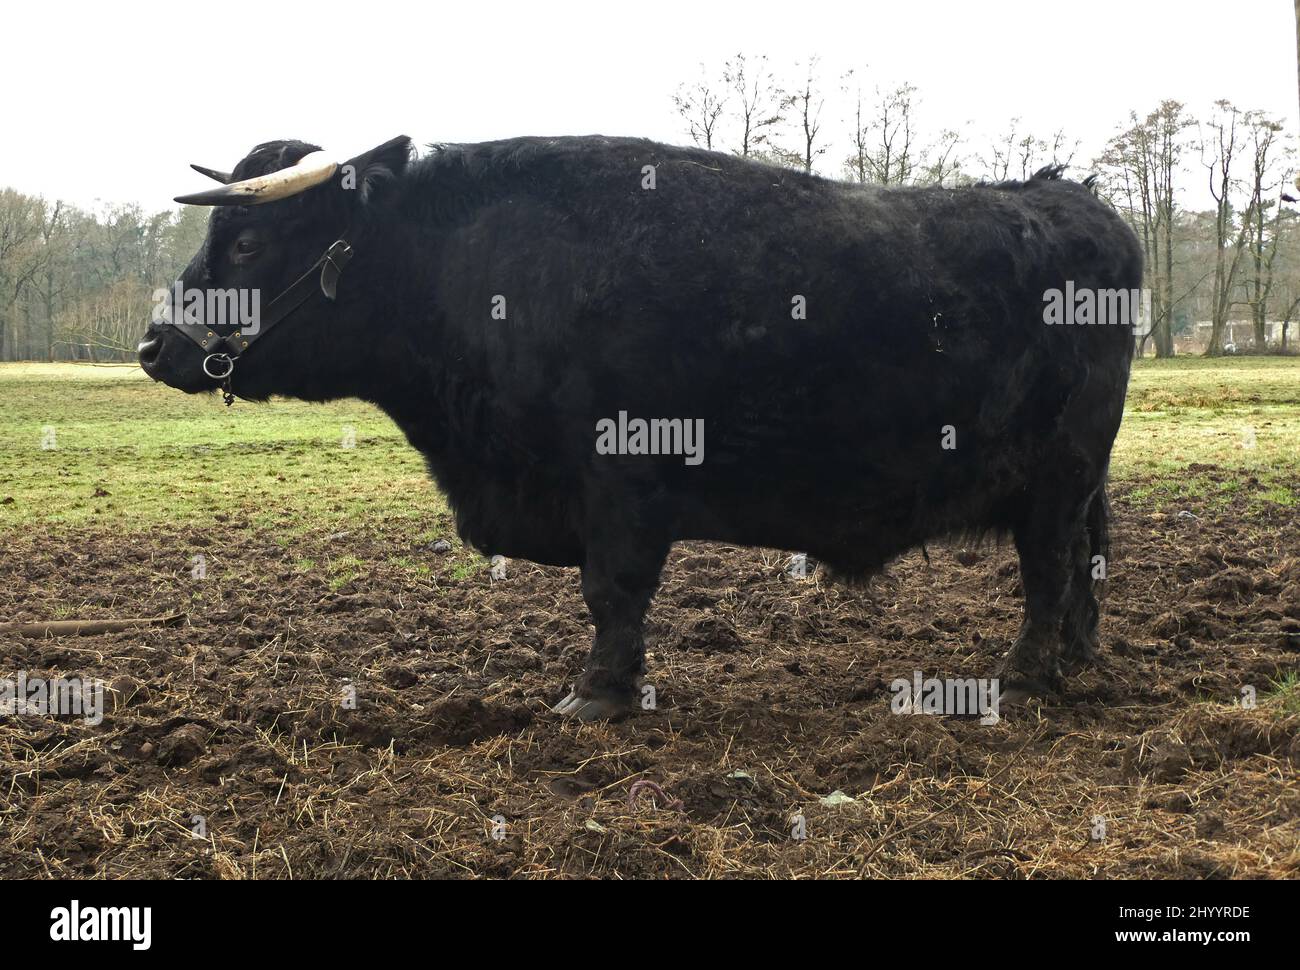 Black cow with horns.Dexter cattle is originating in Ireland. Dexters are a small, friendly, dual-purpose breed Stock Photo